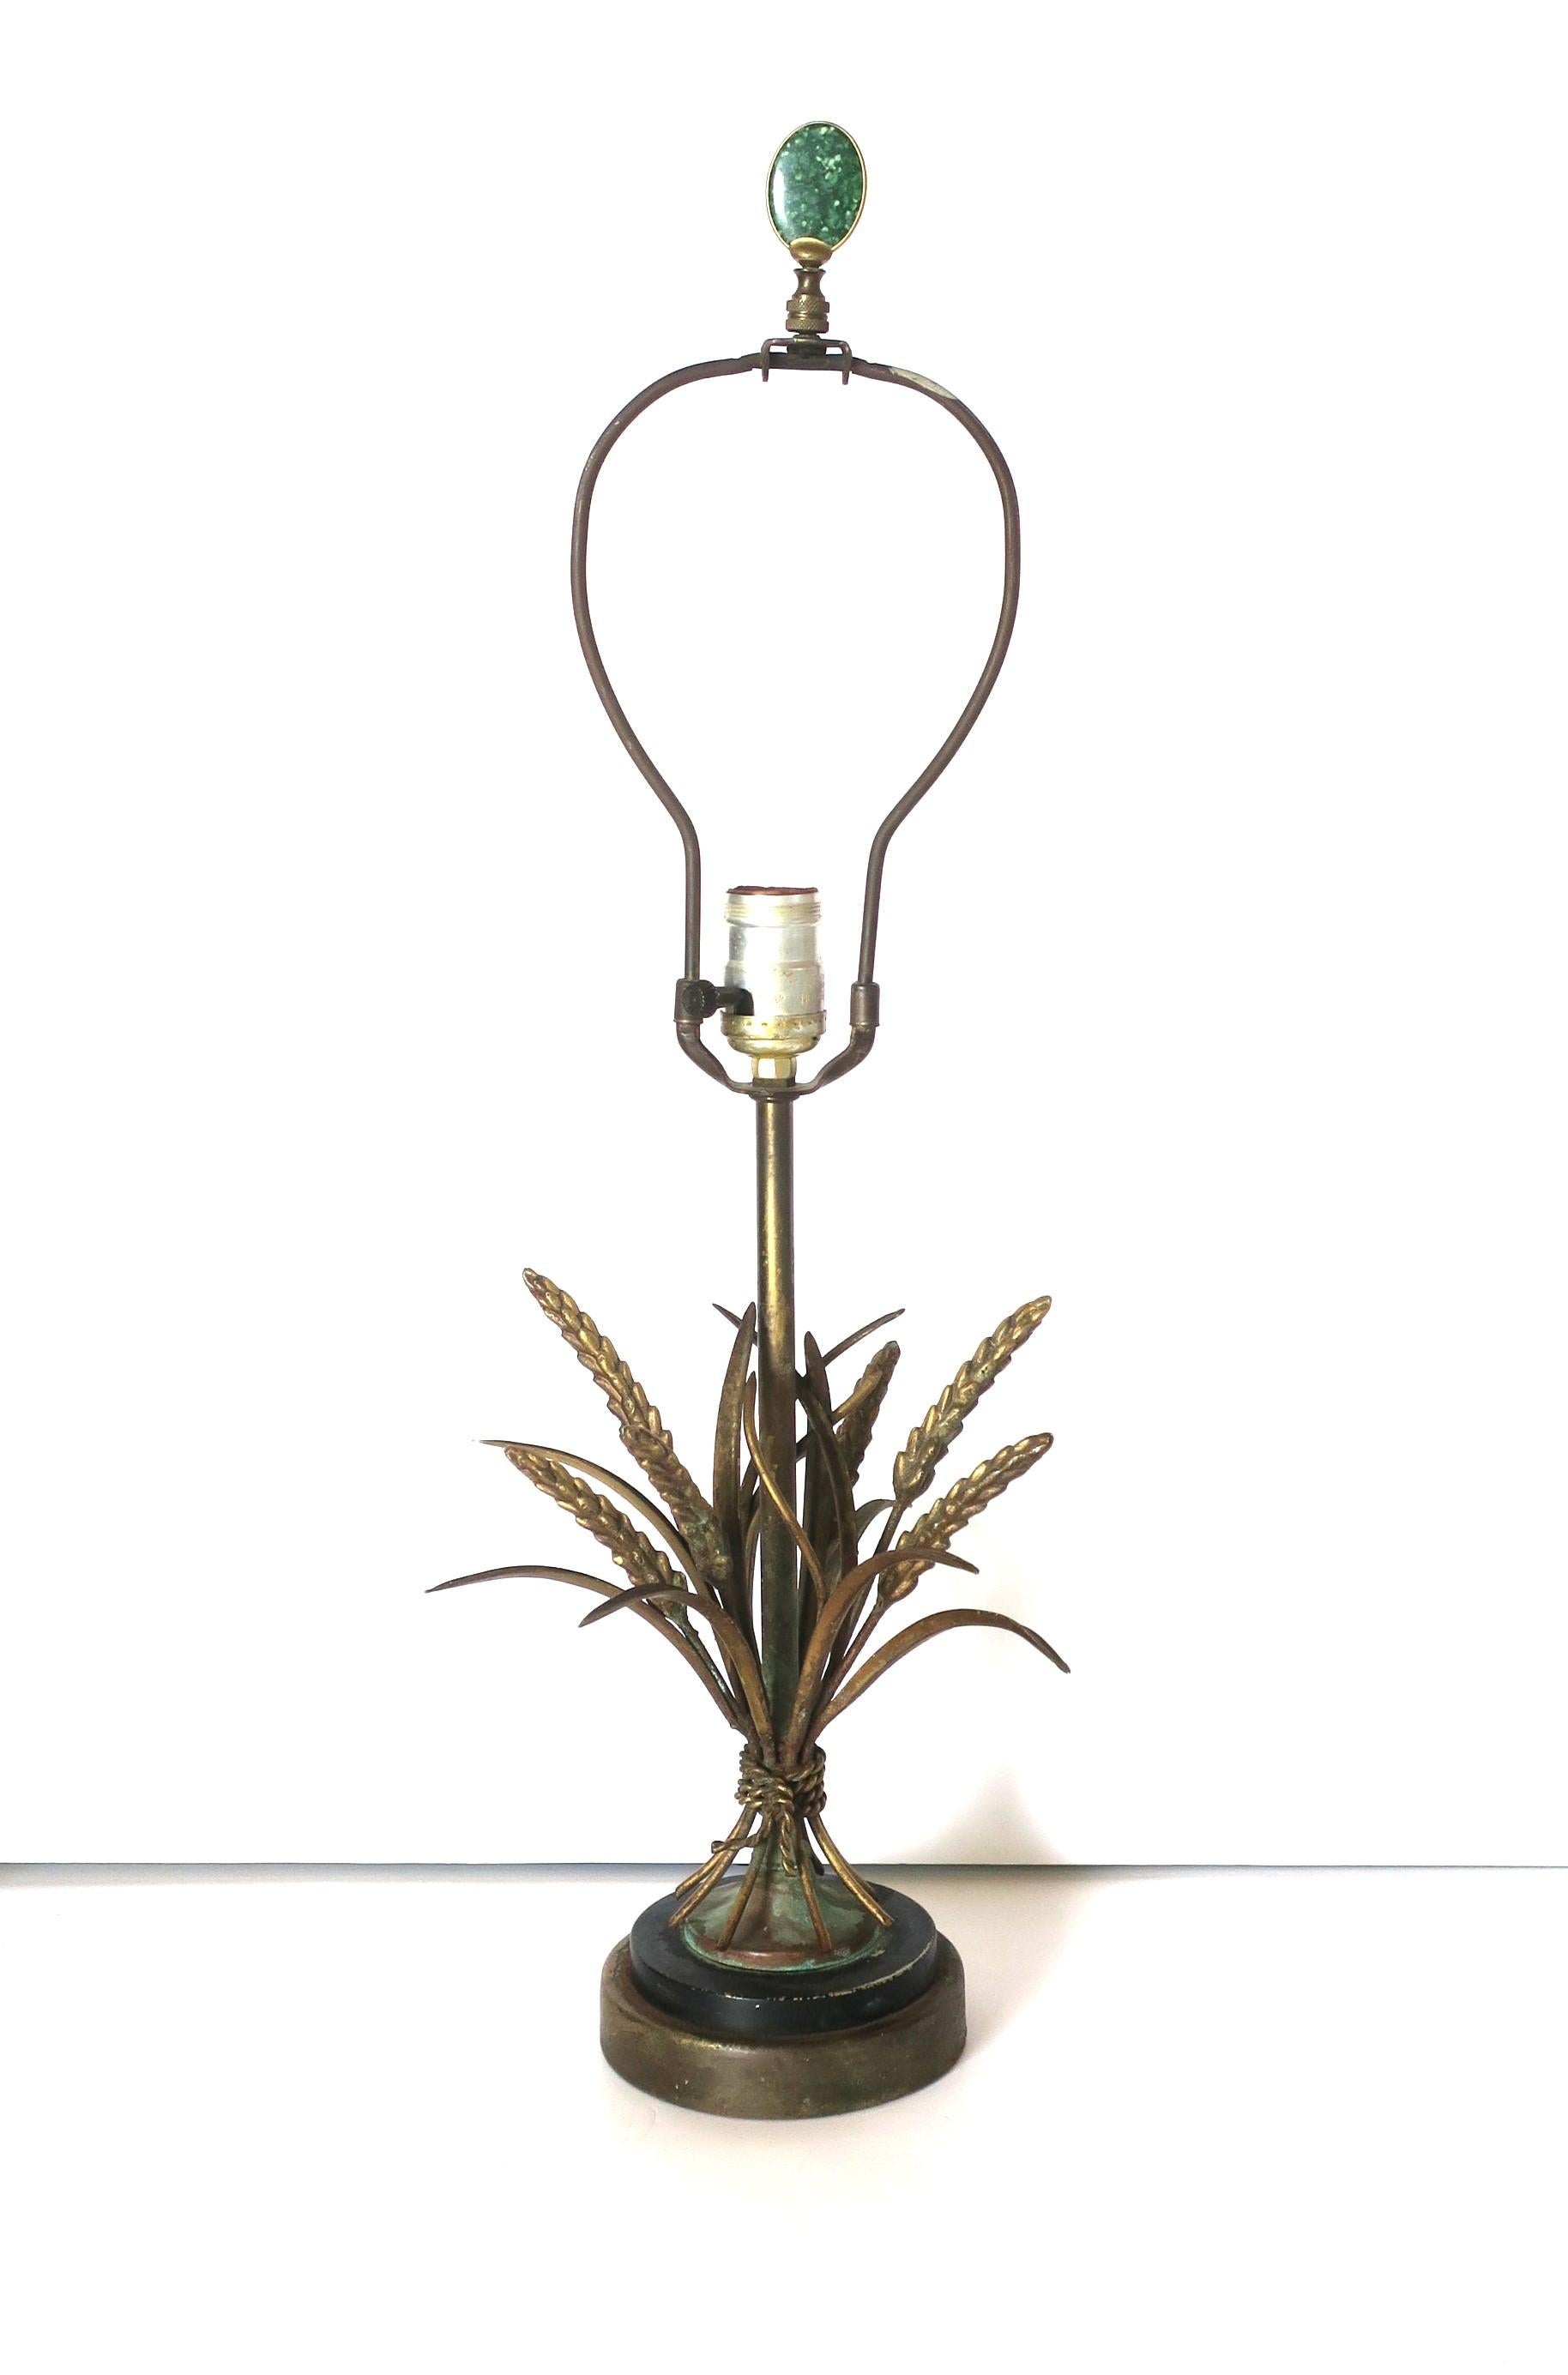 Italian Gold Gilt Brass Sheaf of Wheat Desk or Table Lamp After Maison Baguès In Good Condition For Sale In New York, NY